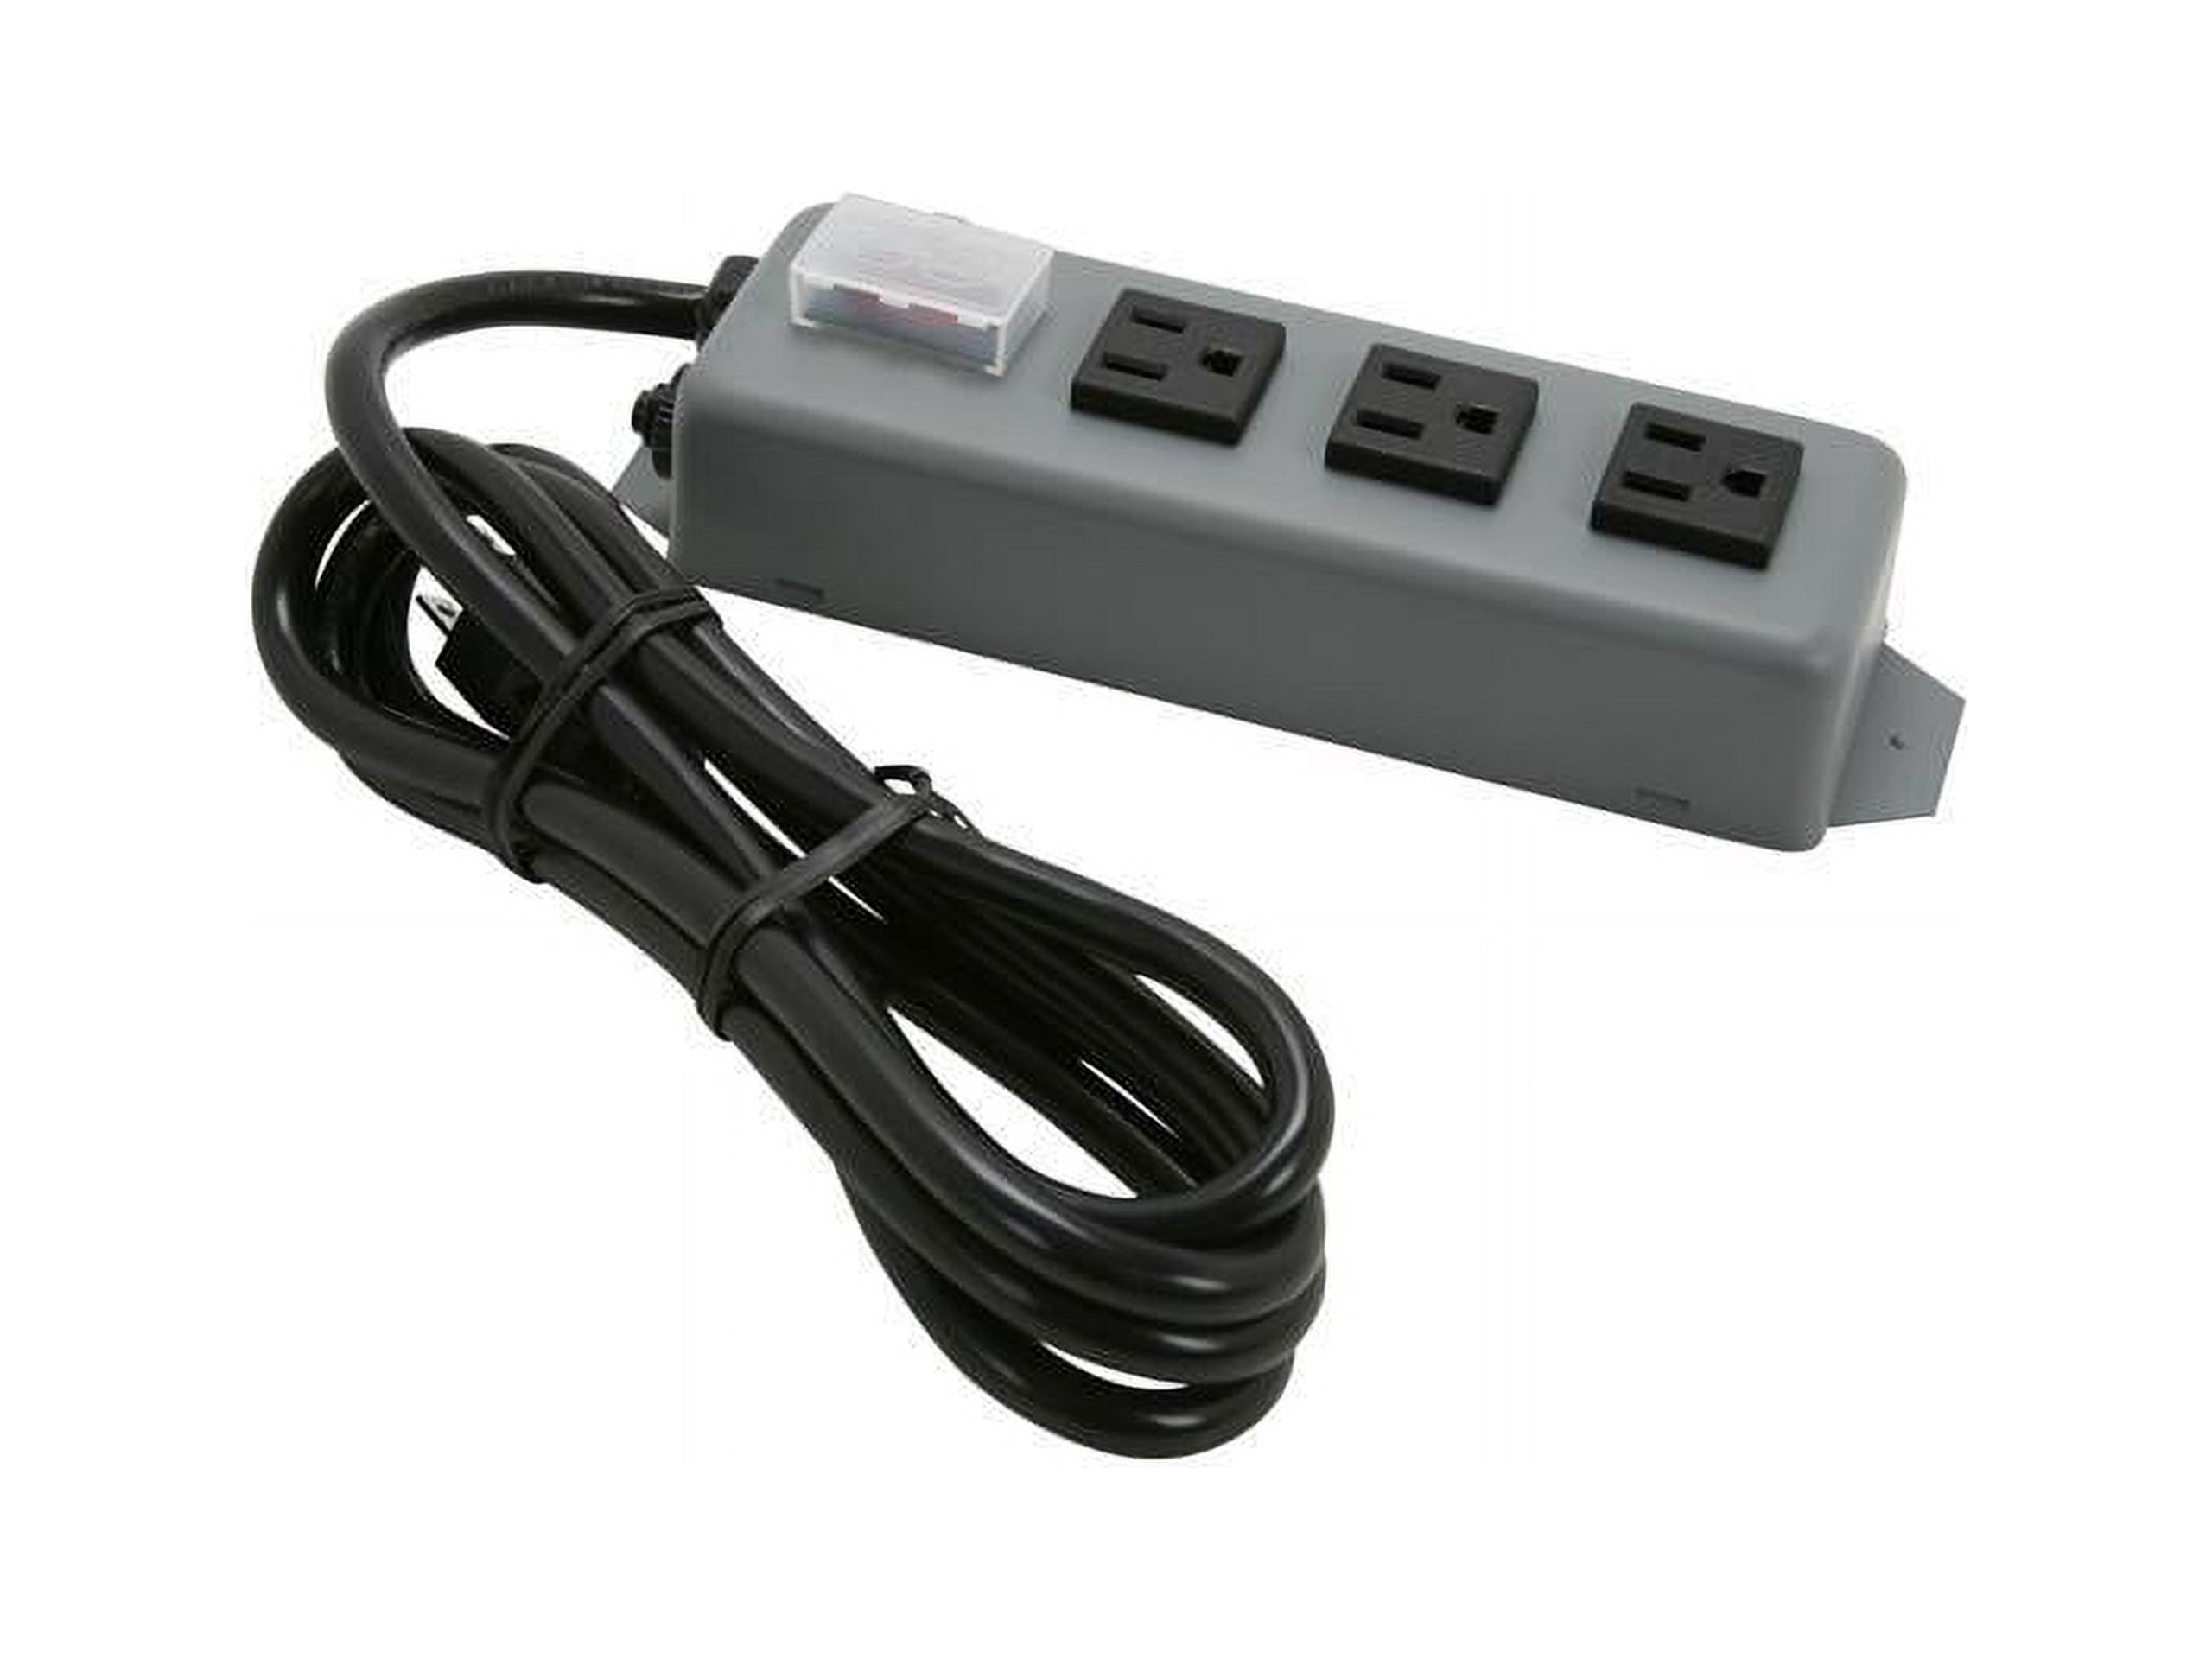 Tripp Lite 3SP Waber by Tripp Lite 3-Outlet Industrial Power Strip, 6-Foot Cord - image 1 of 4